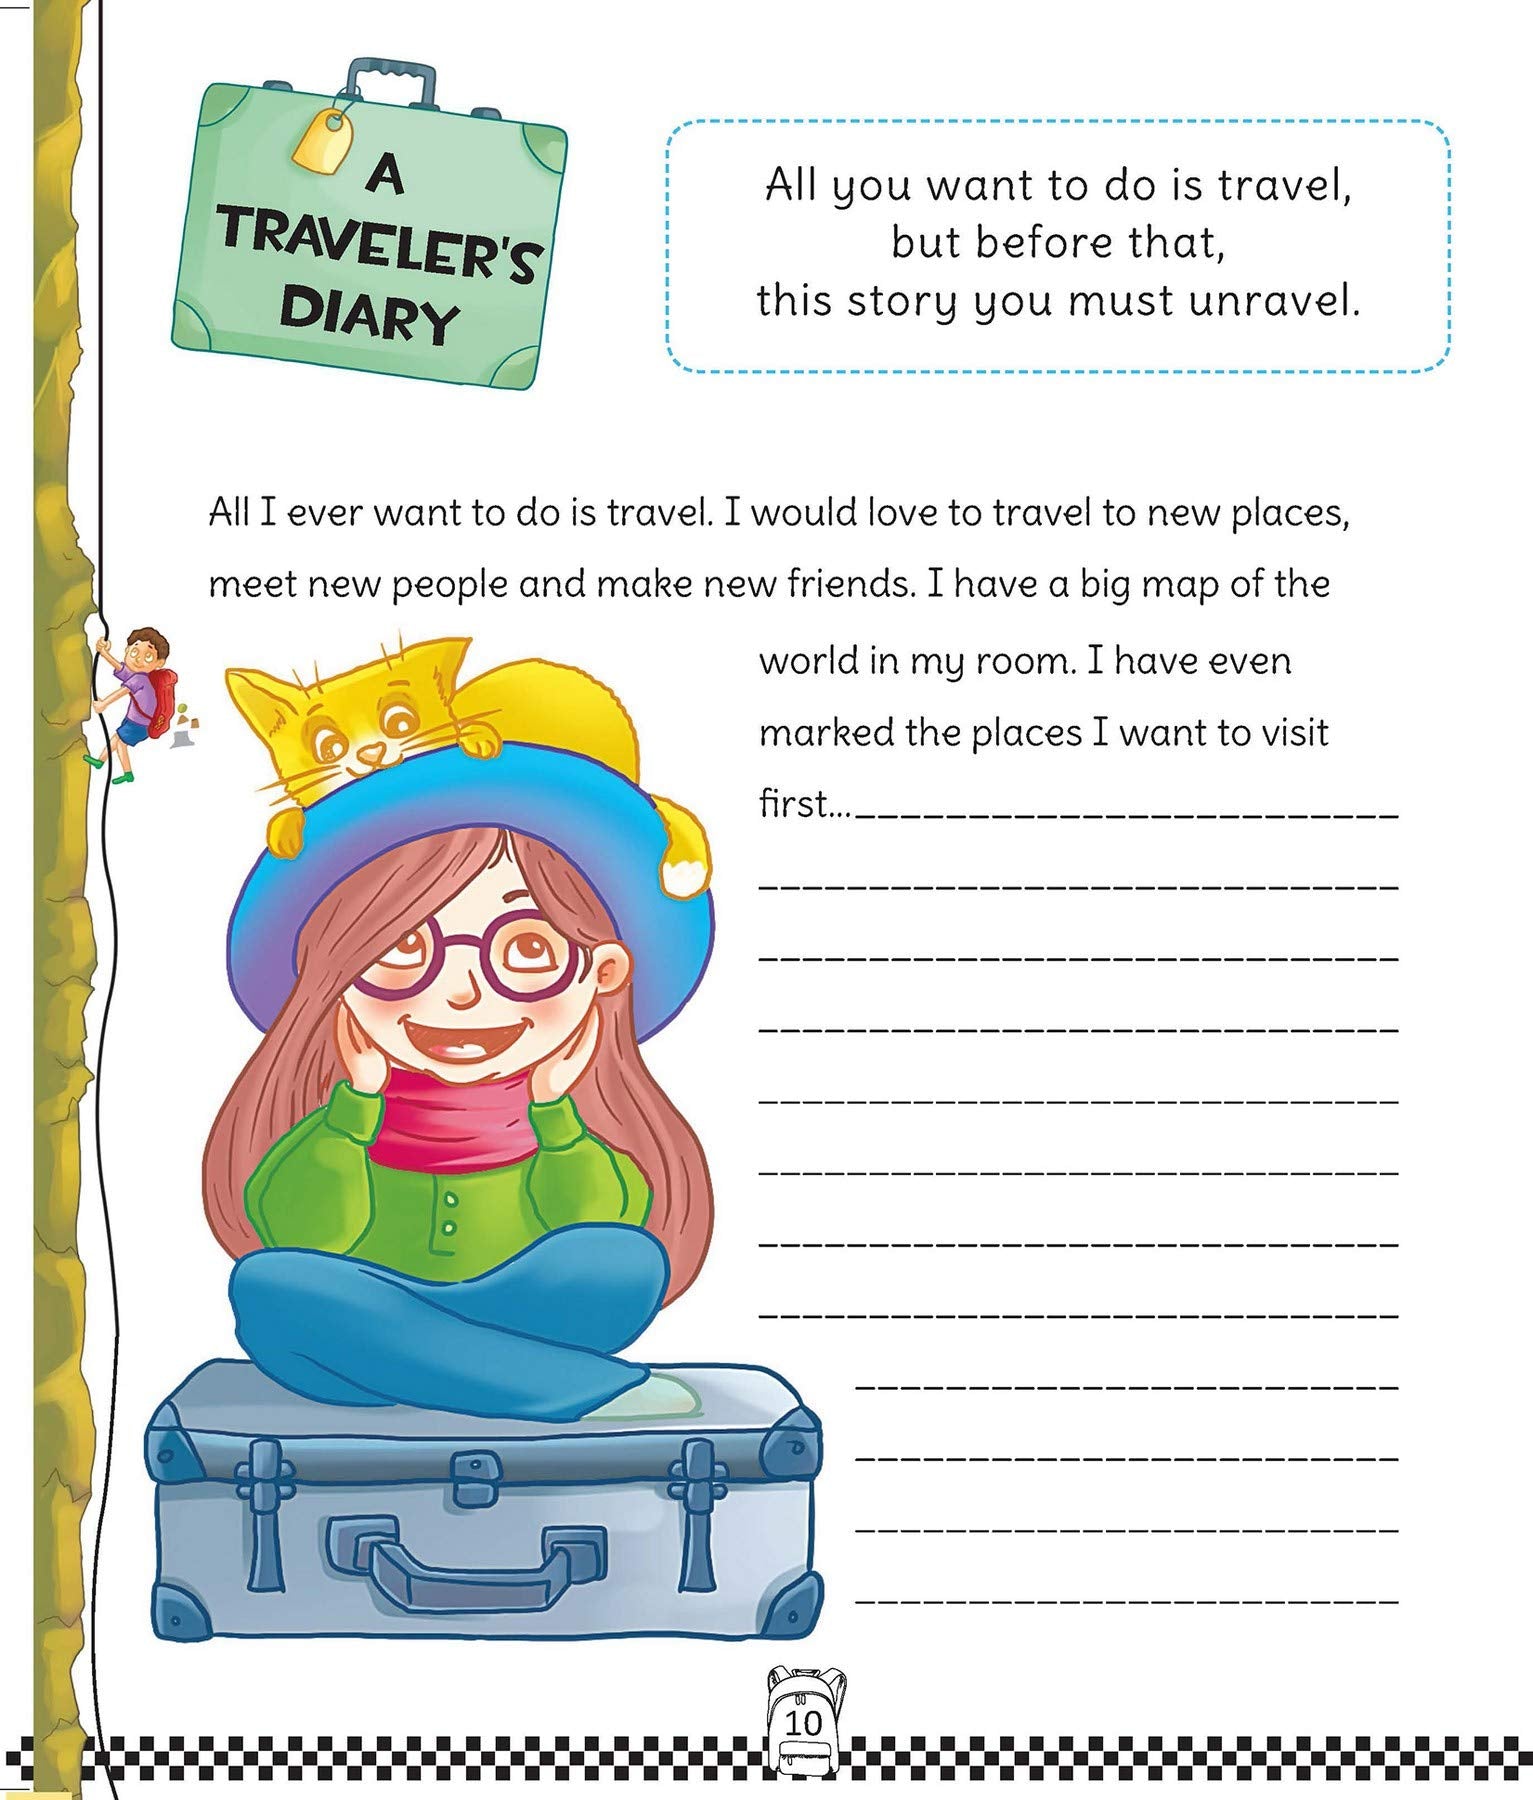 Travel Home, Travel Beyond - Imagination Writing Story Book For Children Ages 8 to 11 (Telling Teeny Tales)